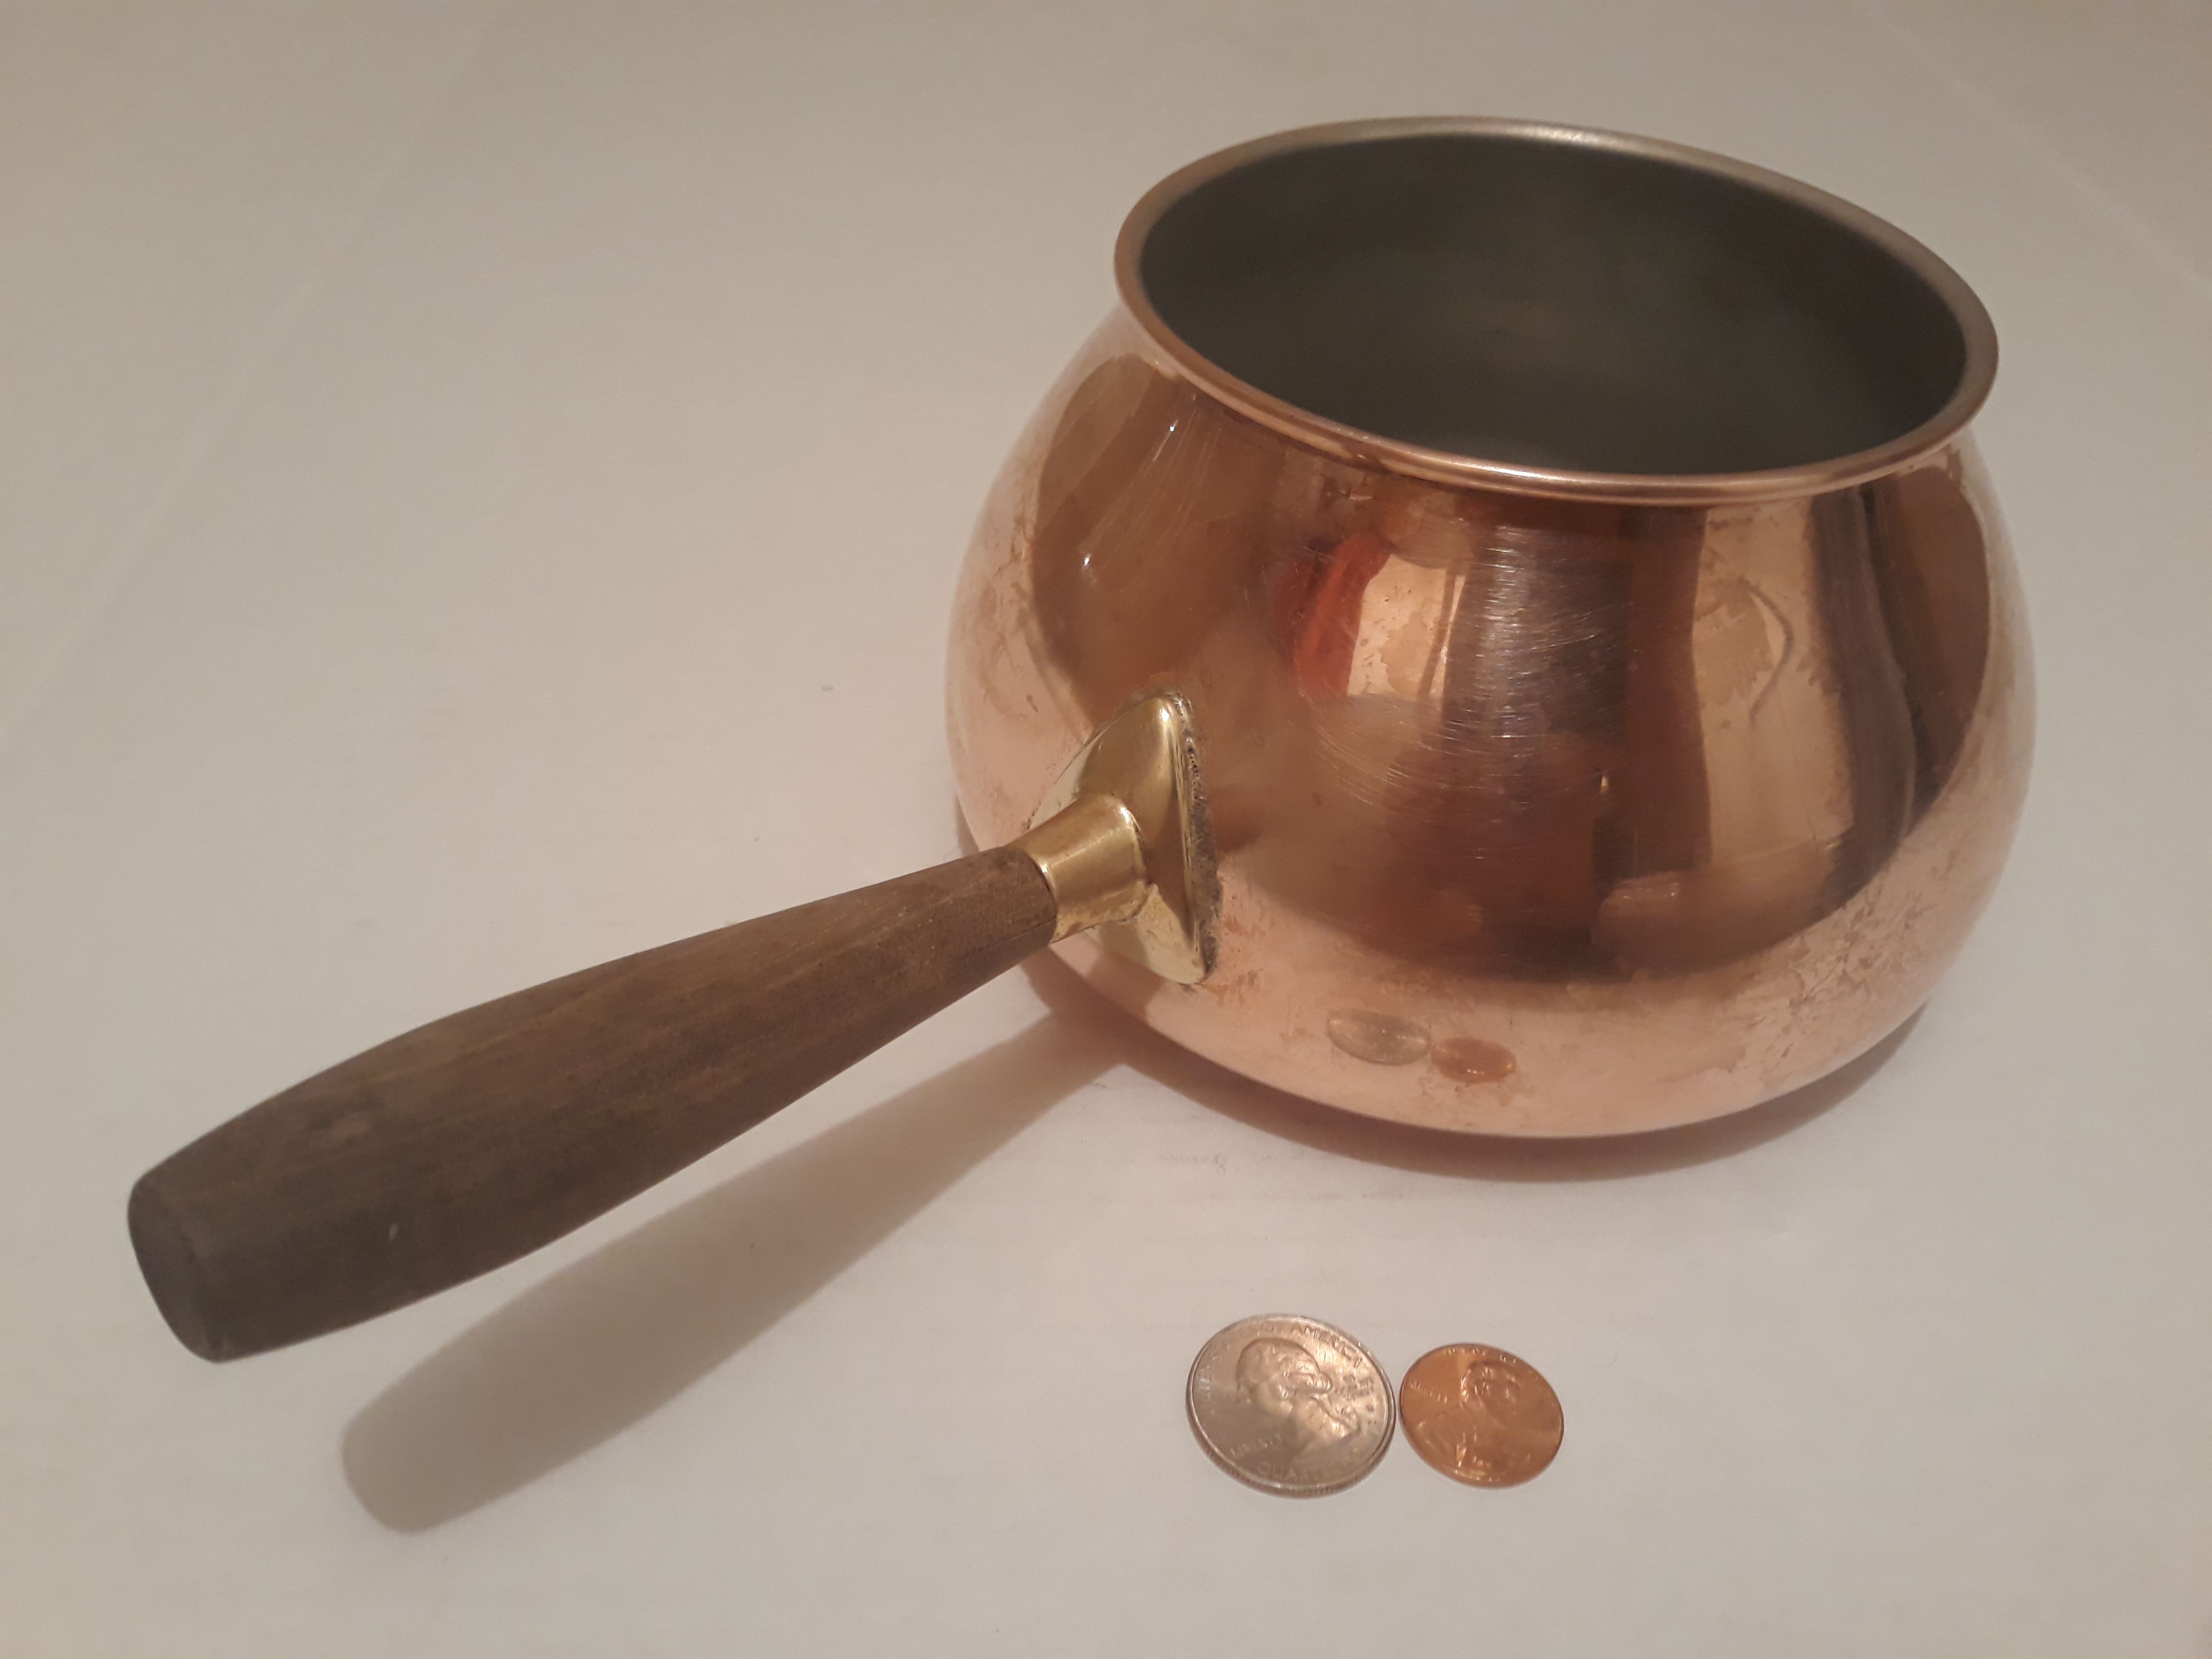 Vintage Metal Copper, Brass and Wood Pot, 10" Long and 6" x 3 1/2" Pot Size, Made in Portugal, Kitchen Decor, Shelf Display